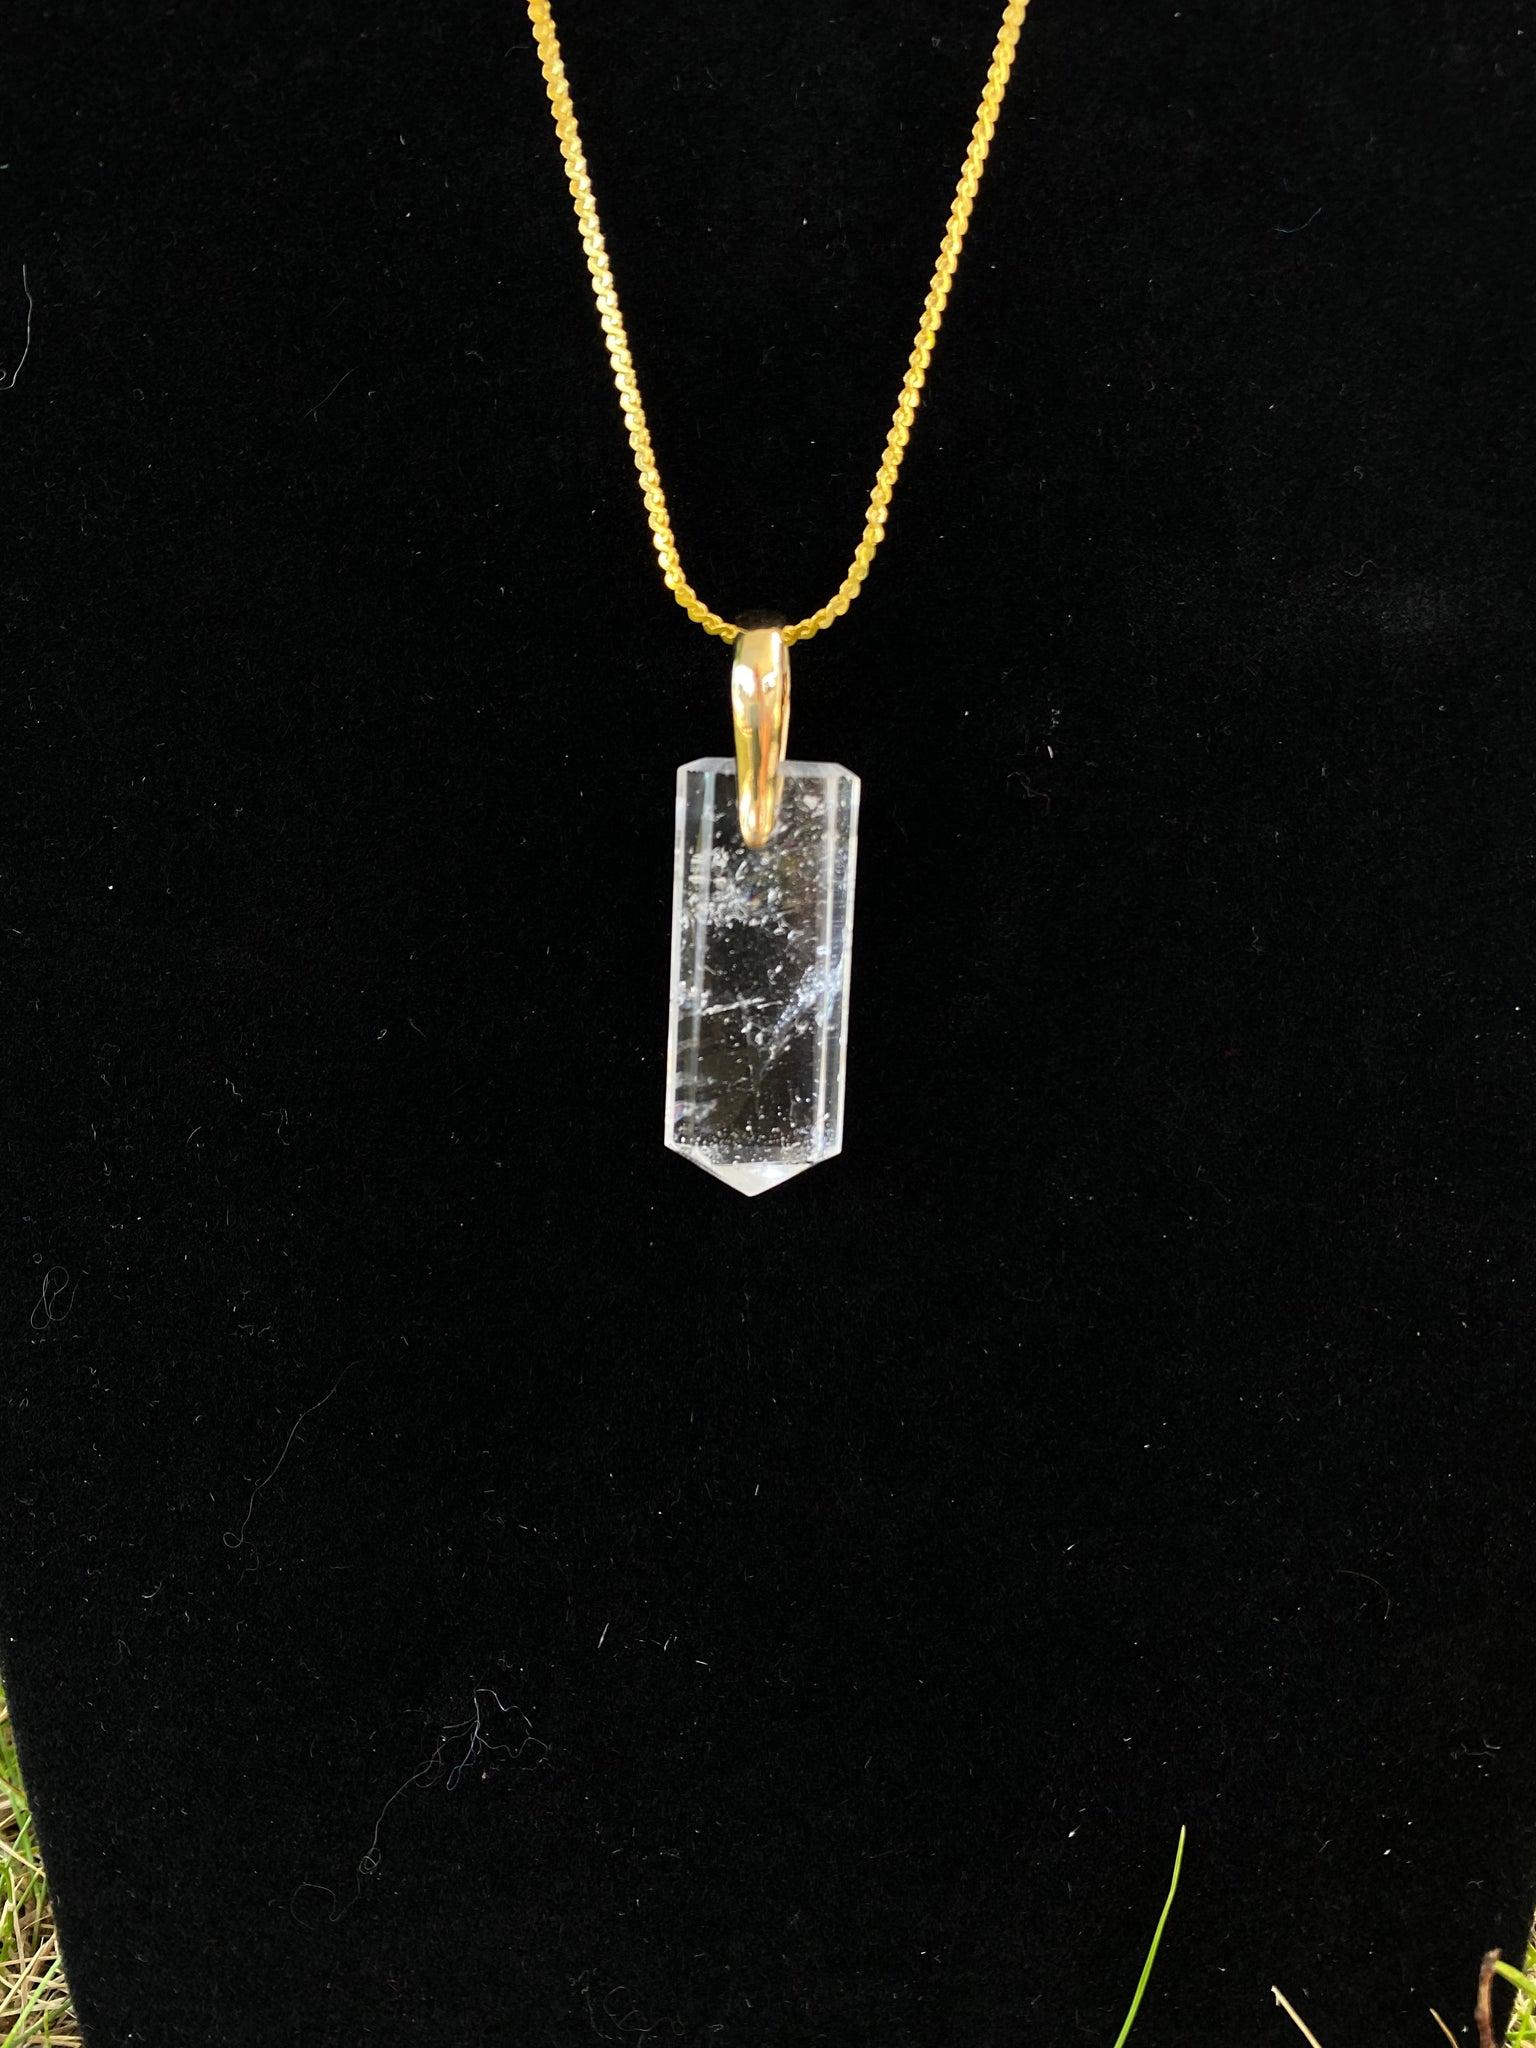 Lemurian Quartz - Gold Plated Lead & Nickel Free Necklace